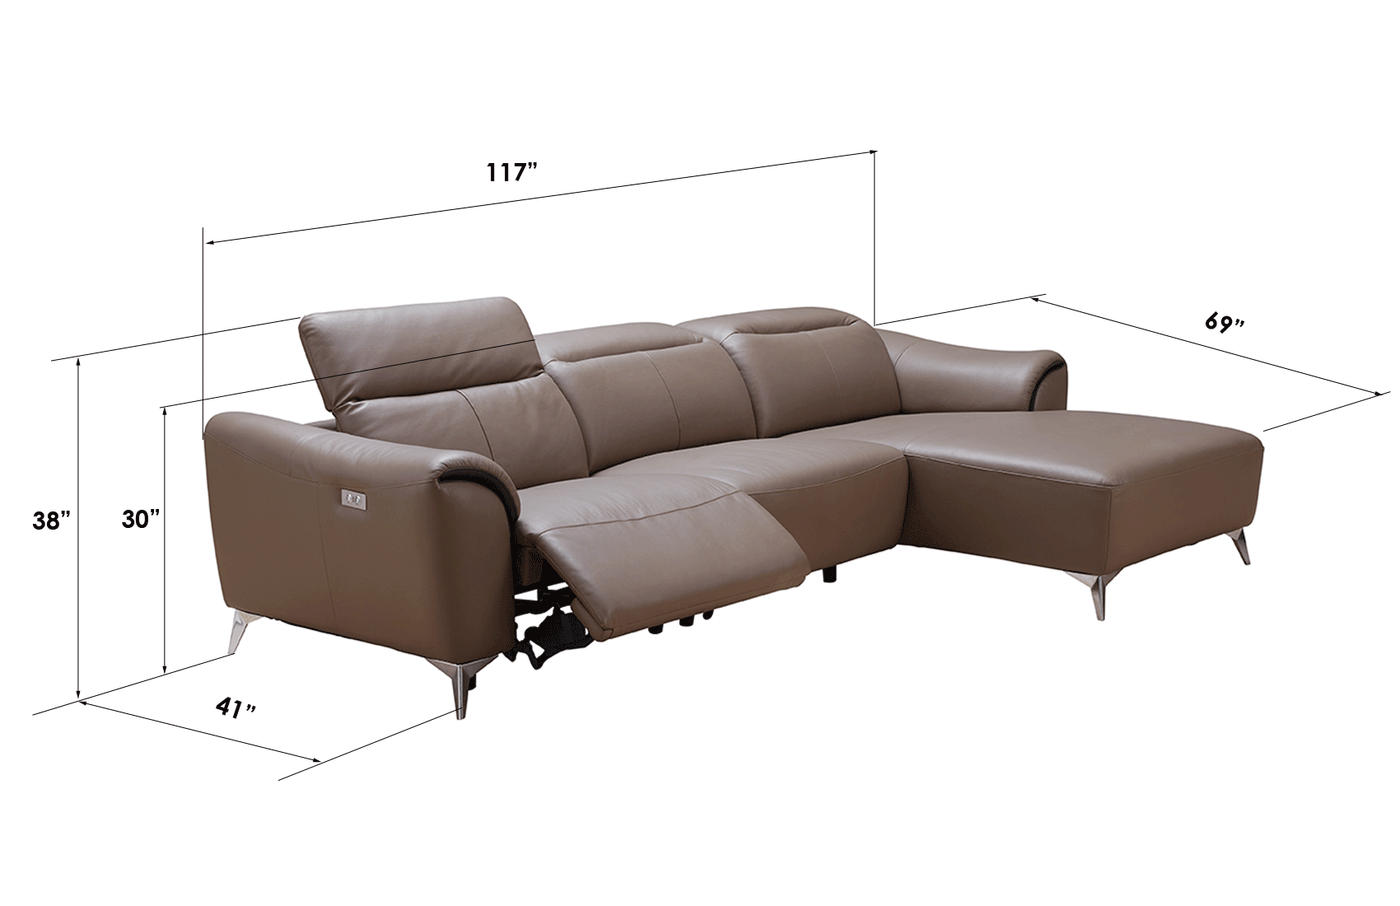 Arvin Sectional